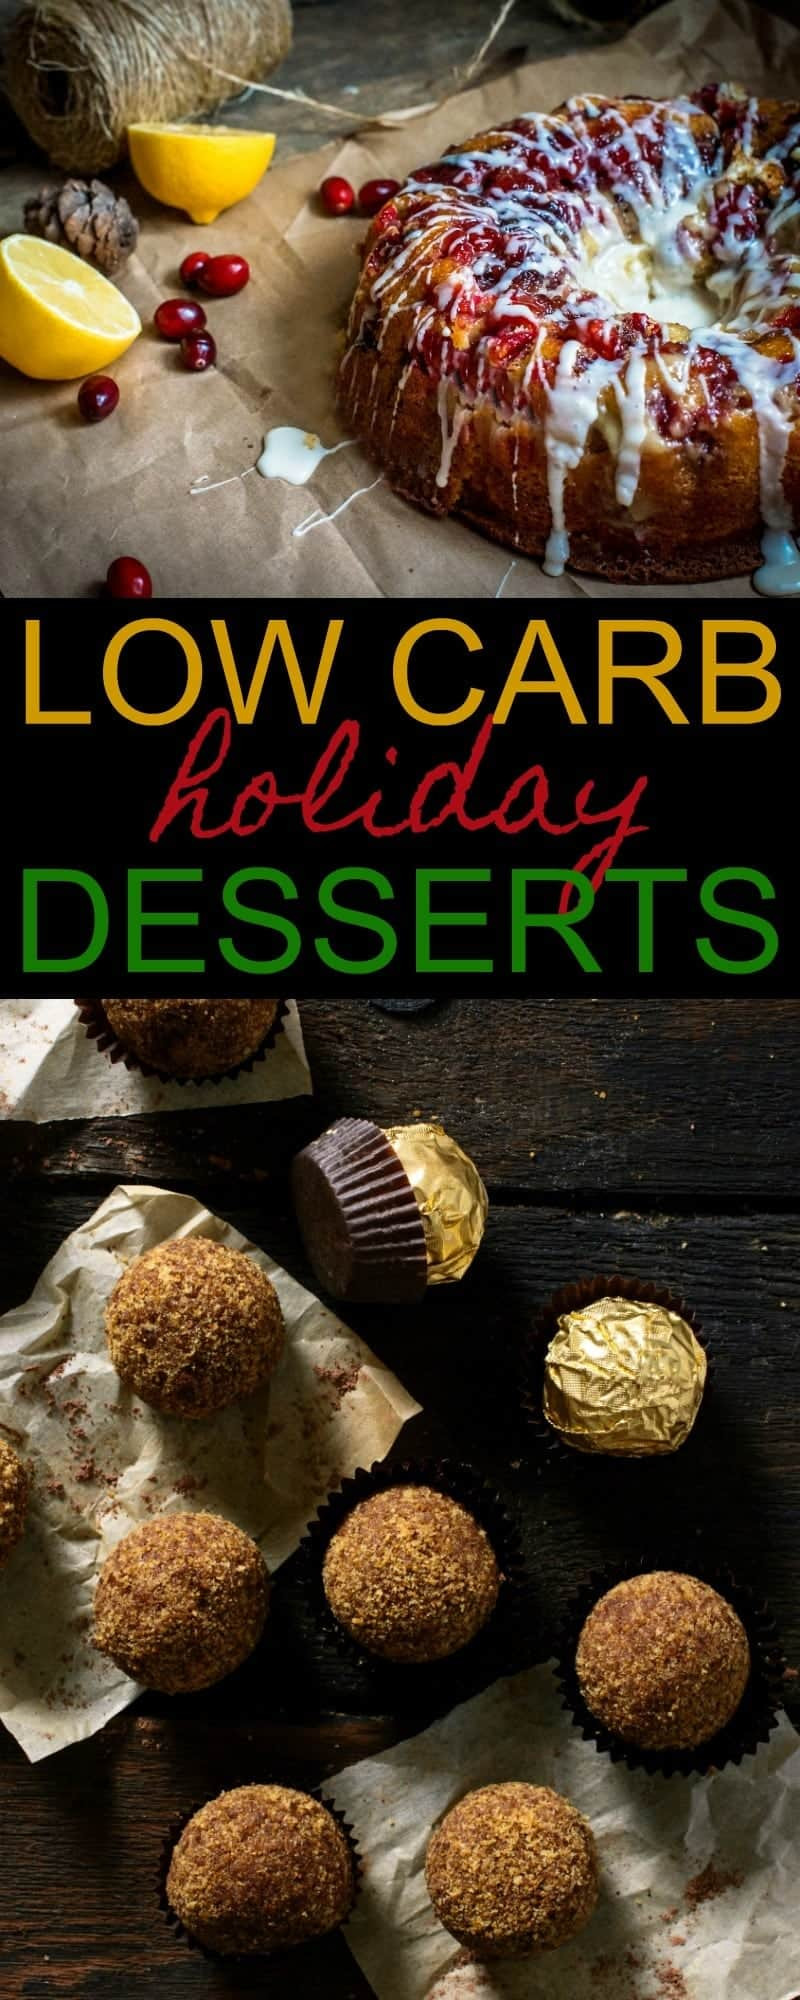 Low Carb Christmas Desserts
 Low Carb Holiday Desserts 15 Delicious Recipes 730